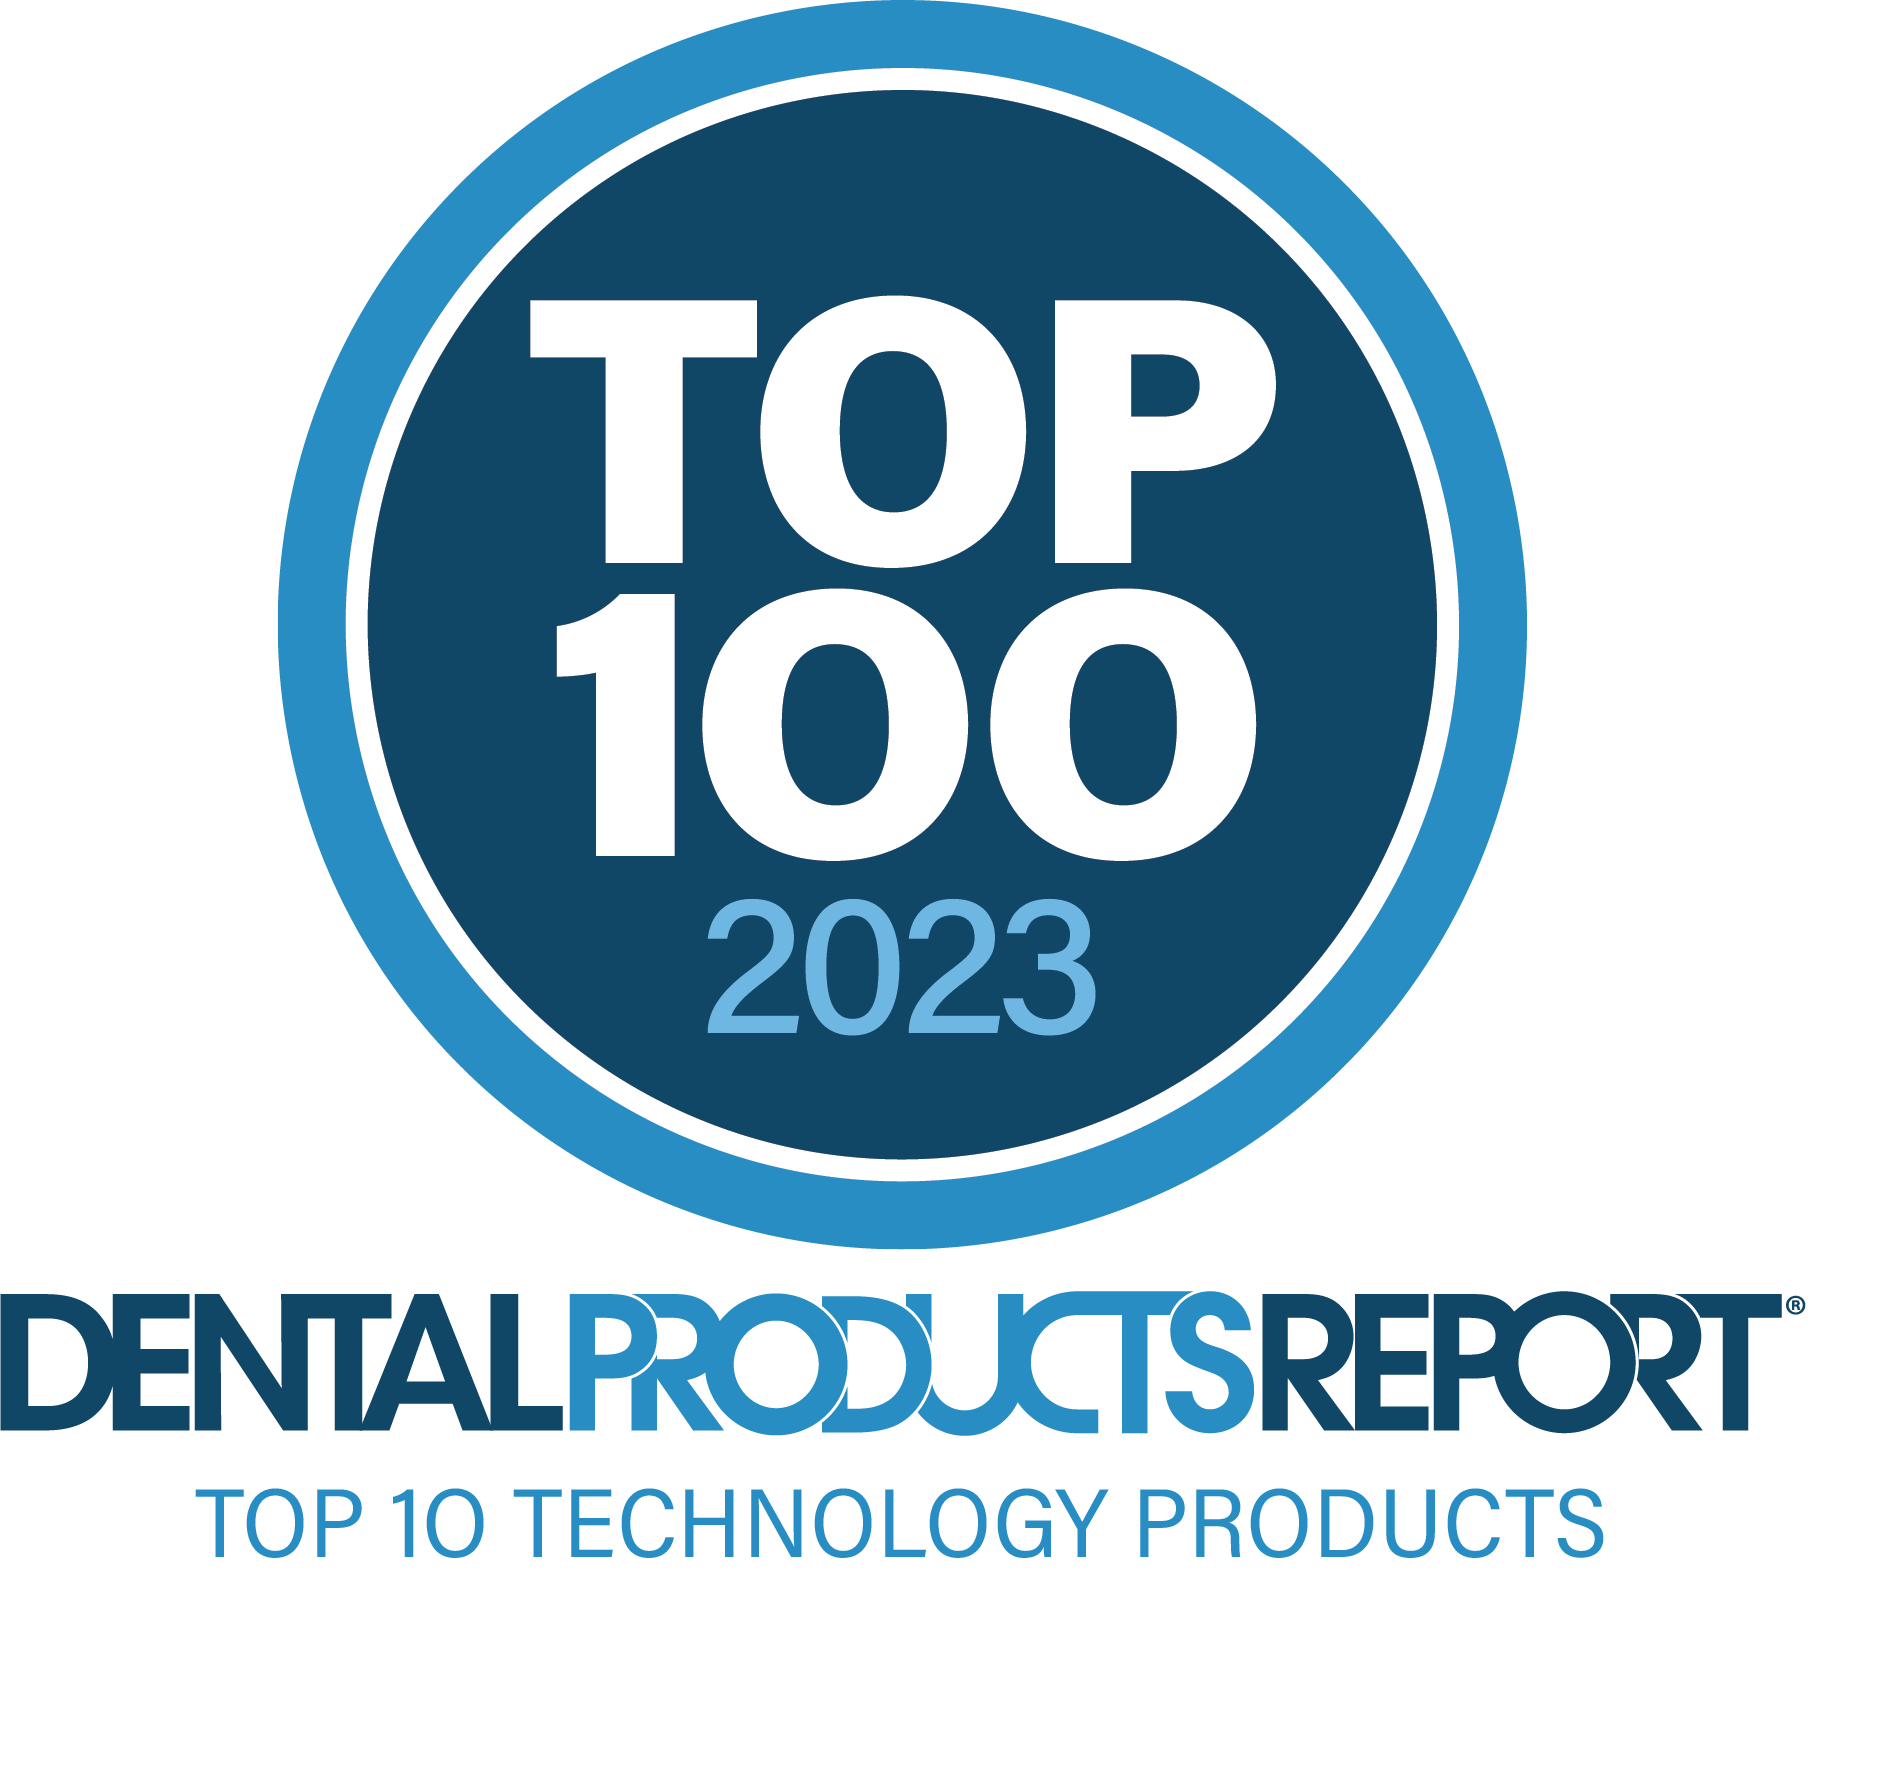 DPR Top 100: The Top 10 Technology Products of 2023